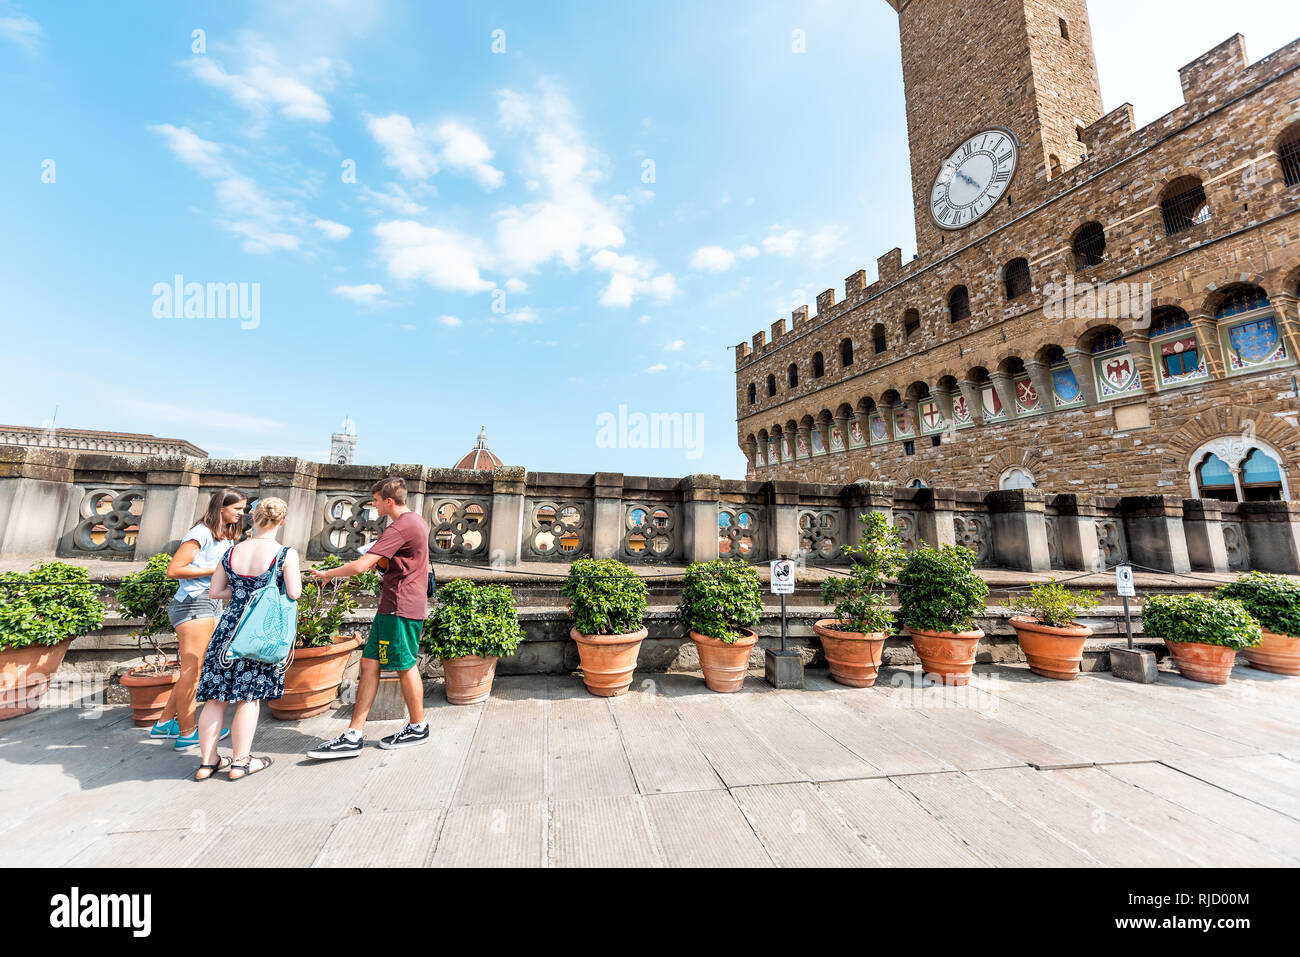 Firenze, Italy - August 30, 2018: Many people on rooftop terrace of famous Florence Uffizi art museum gallery with view of old building Palazzo Vecchi Stock Photo